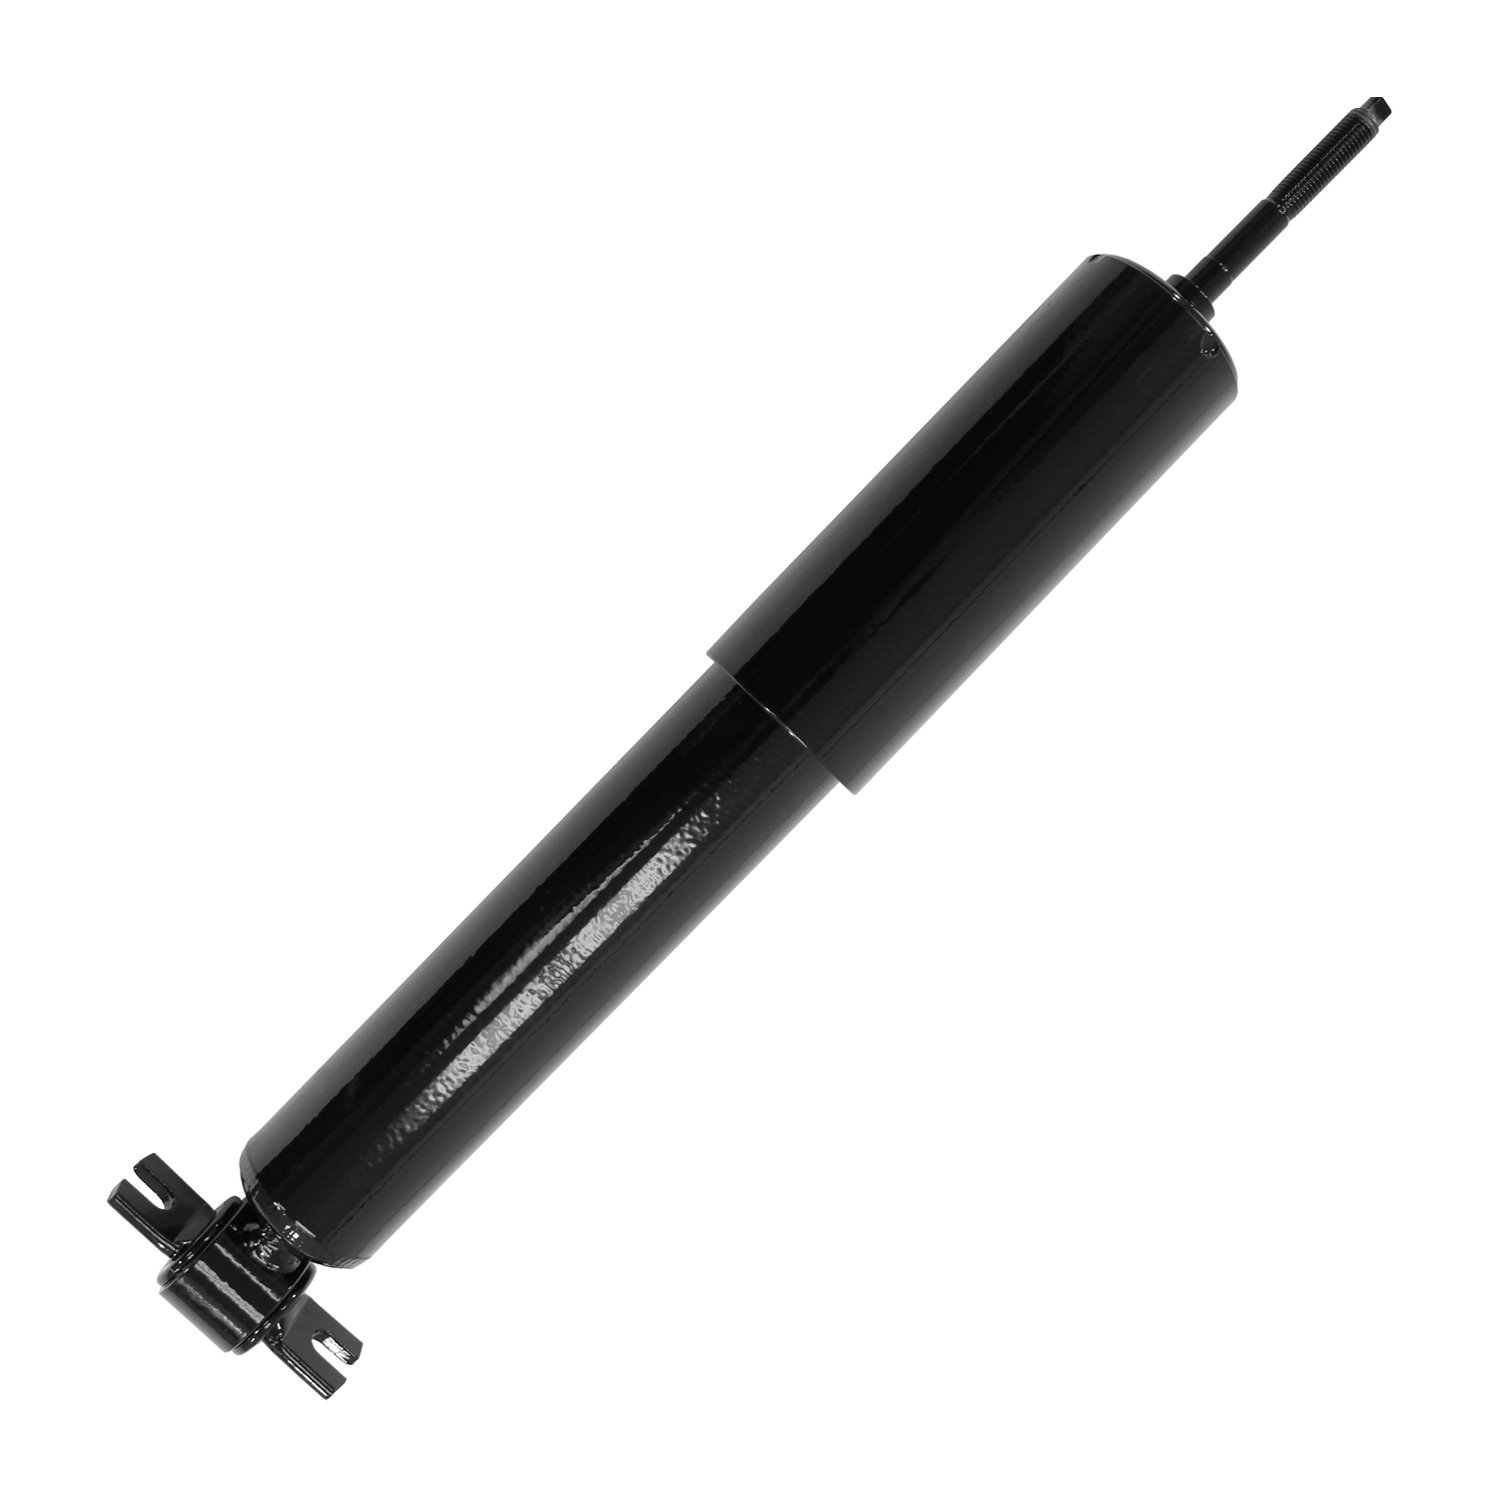 211140 Gas Charged Shock Absorber Fits Select Chevy Express 2500, Chevy Express 3500, GMC Savana 2500, GMC Savana 3500